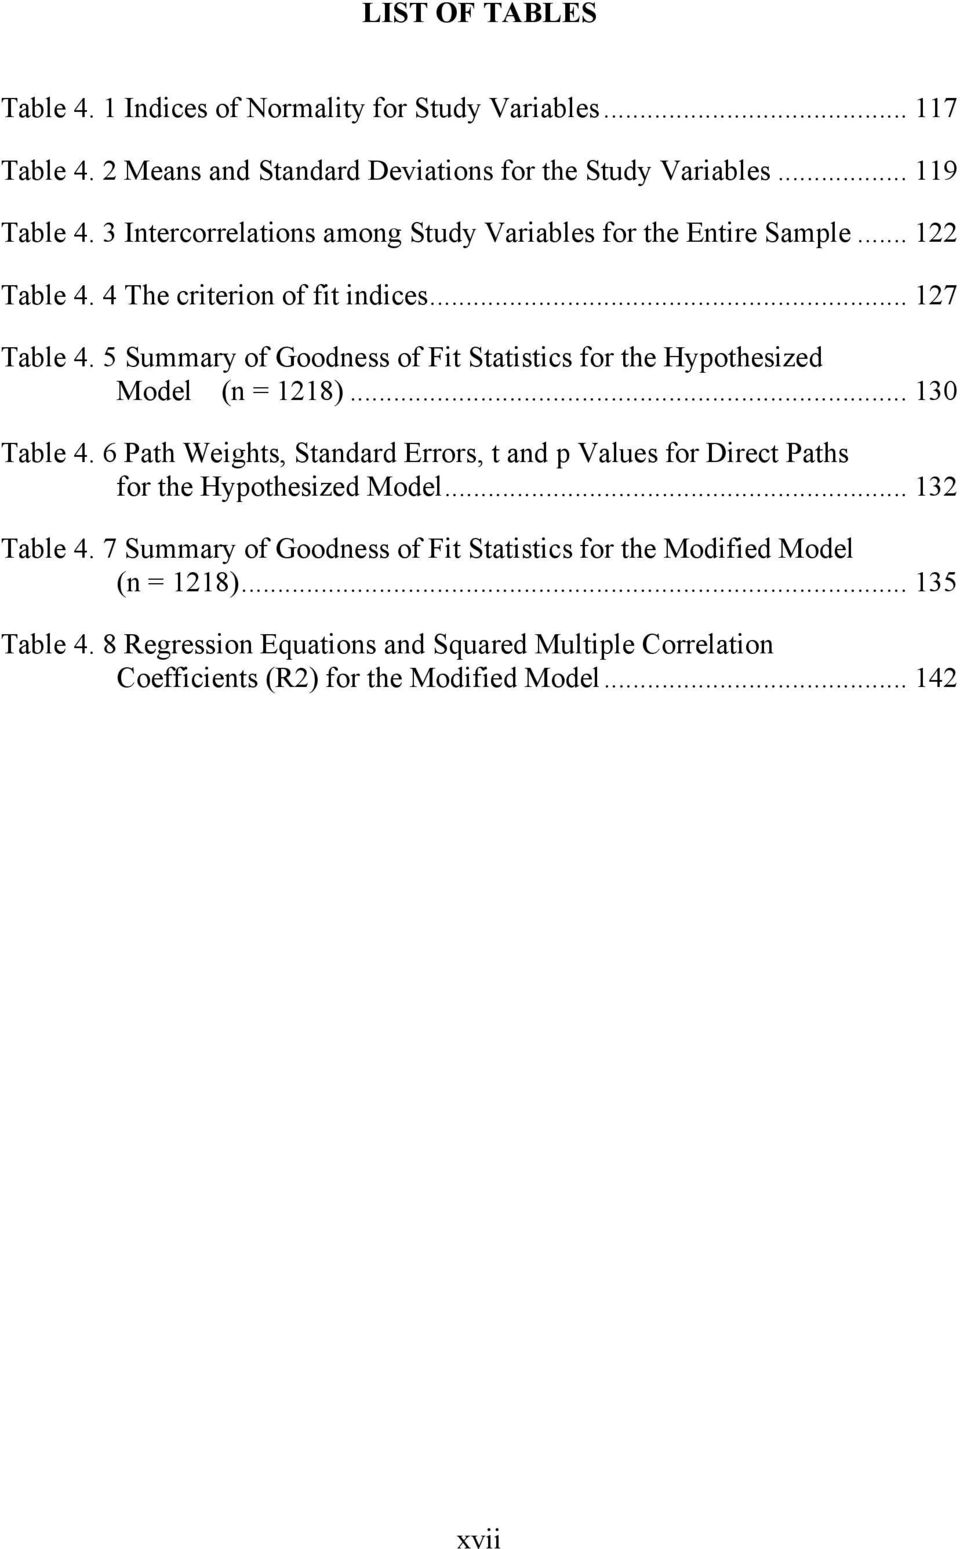 5 Summary of Goodness of Fit Statistics for the Hypothesized Model (n = 1218)... 130 Table 4.